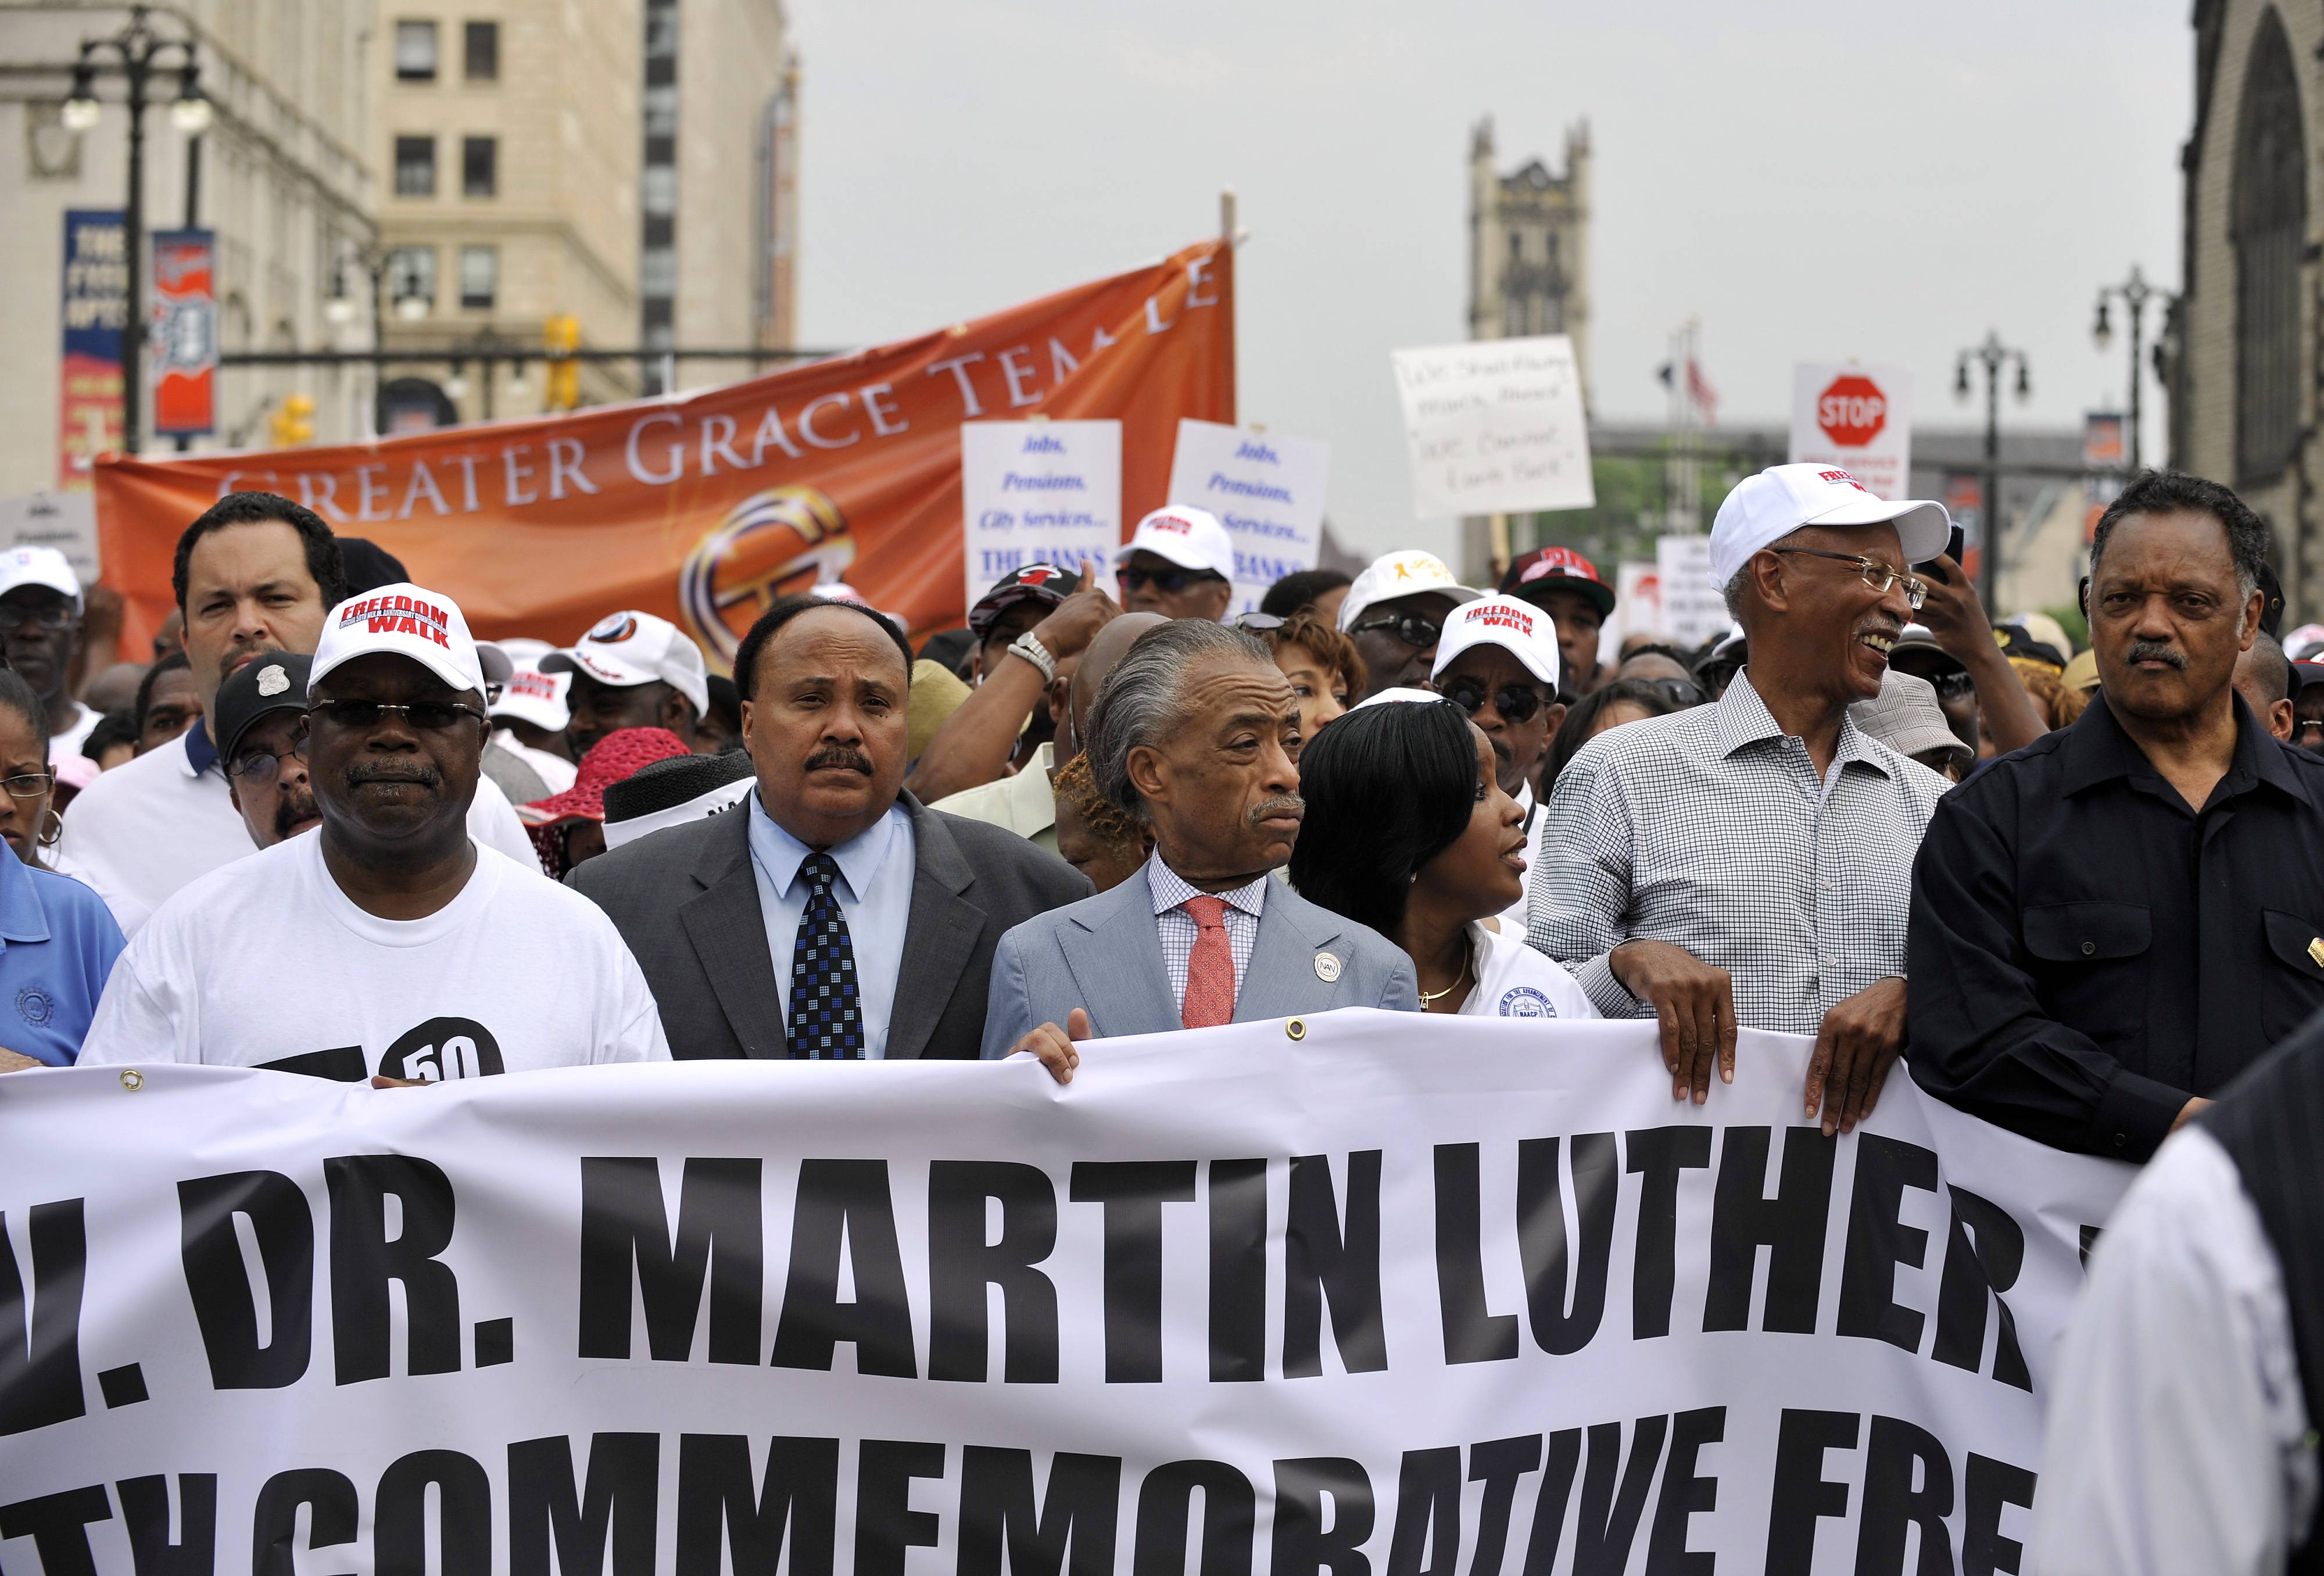 MLK’s 1963 Detroit March Remembered&nbsp; - Thousands gathered in Detroit to walk in remembrance of Martin Luther King Jr.’s march in the city 50 years ago. Rev. Al Sharpton, Jesse Jackson and Detroit Mayor Dave Bing led the march and rally Saturday. &nbsp;(Photo: Detroit News, John T. Greilick/AP)